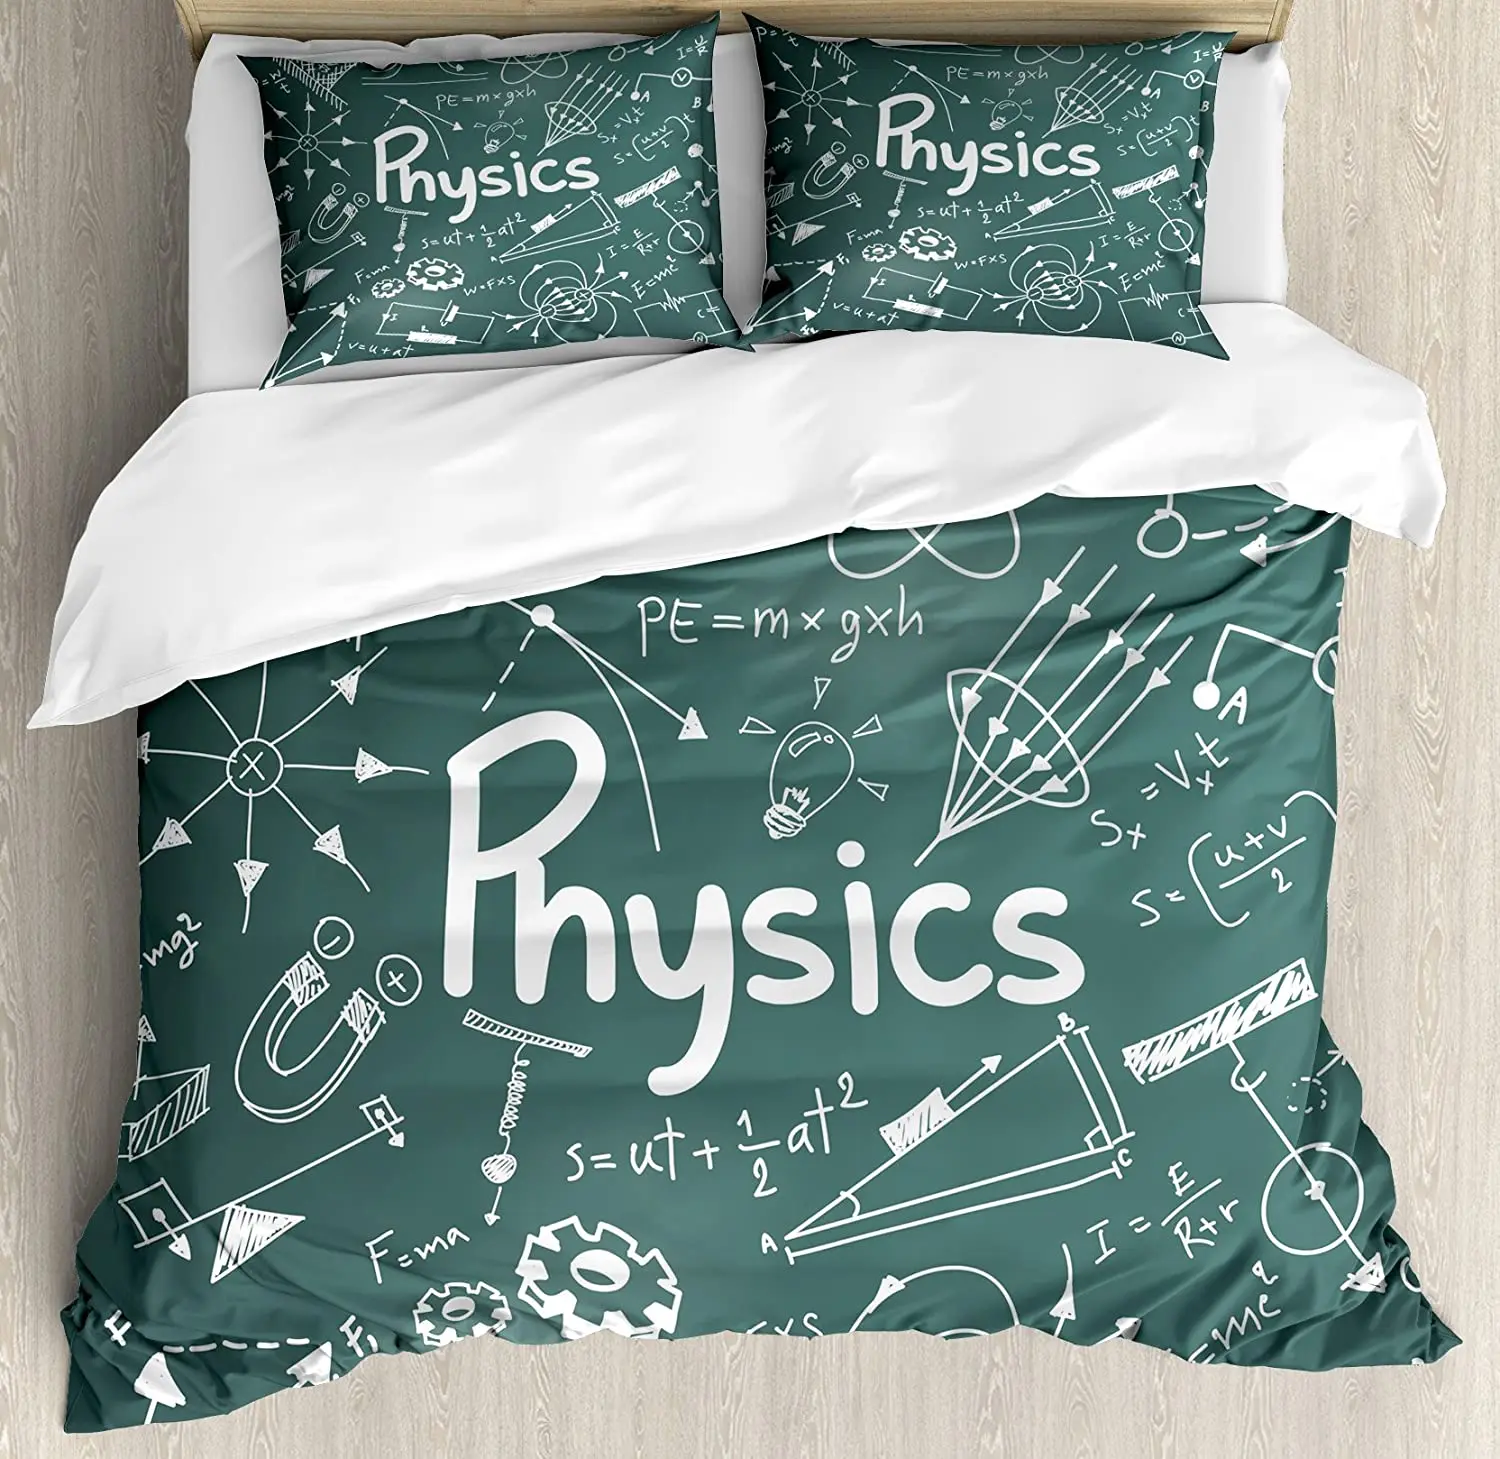 

Doodle Bedding Set For Bedroom Bed Home Physics Science Education Theme Mathematical Formu Duvet Cover Quilt Cover Pillowcase